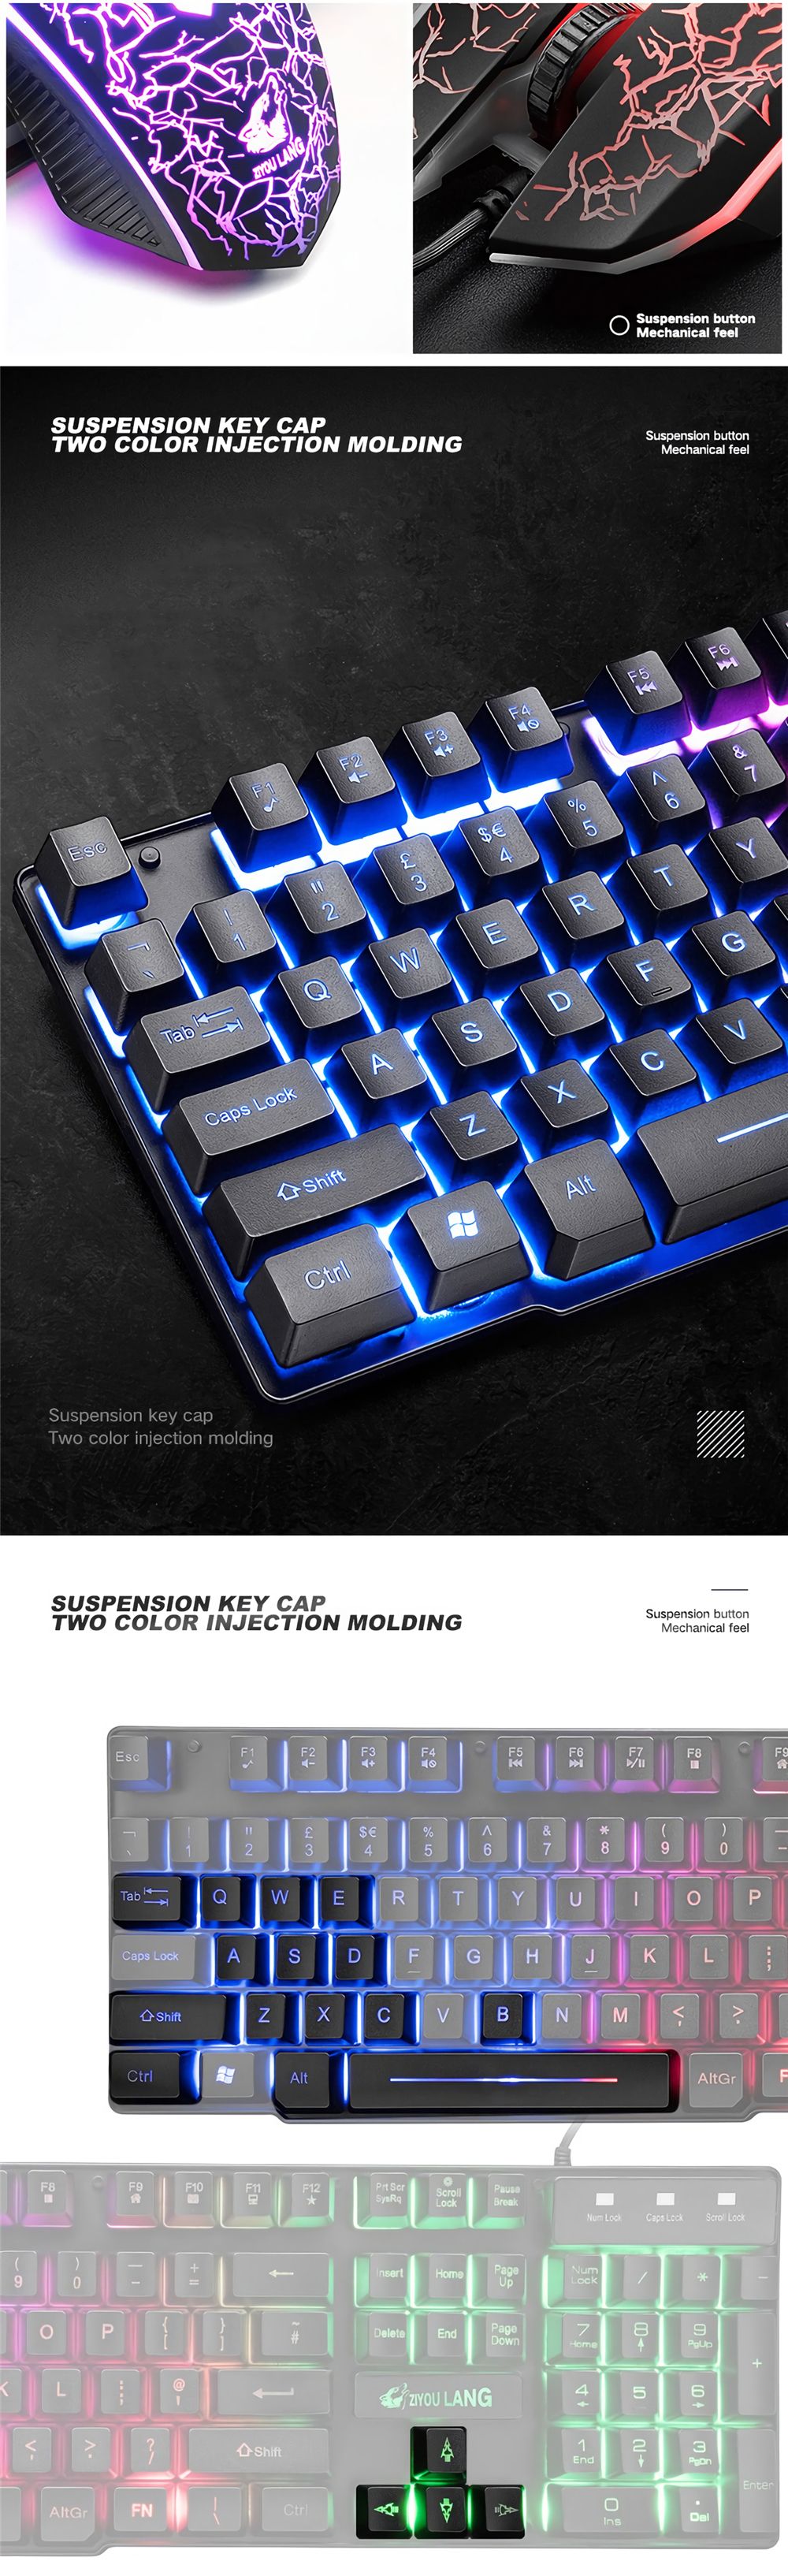 Free-Wolf-T11-Wired-Mechanical-Keyboard-Game-Mouse-Rainbow-RGB-Backlight-Keypad-for-Computer-PC-Lapt-1703799